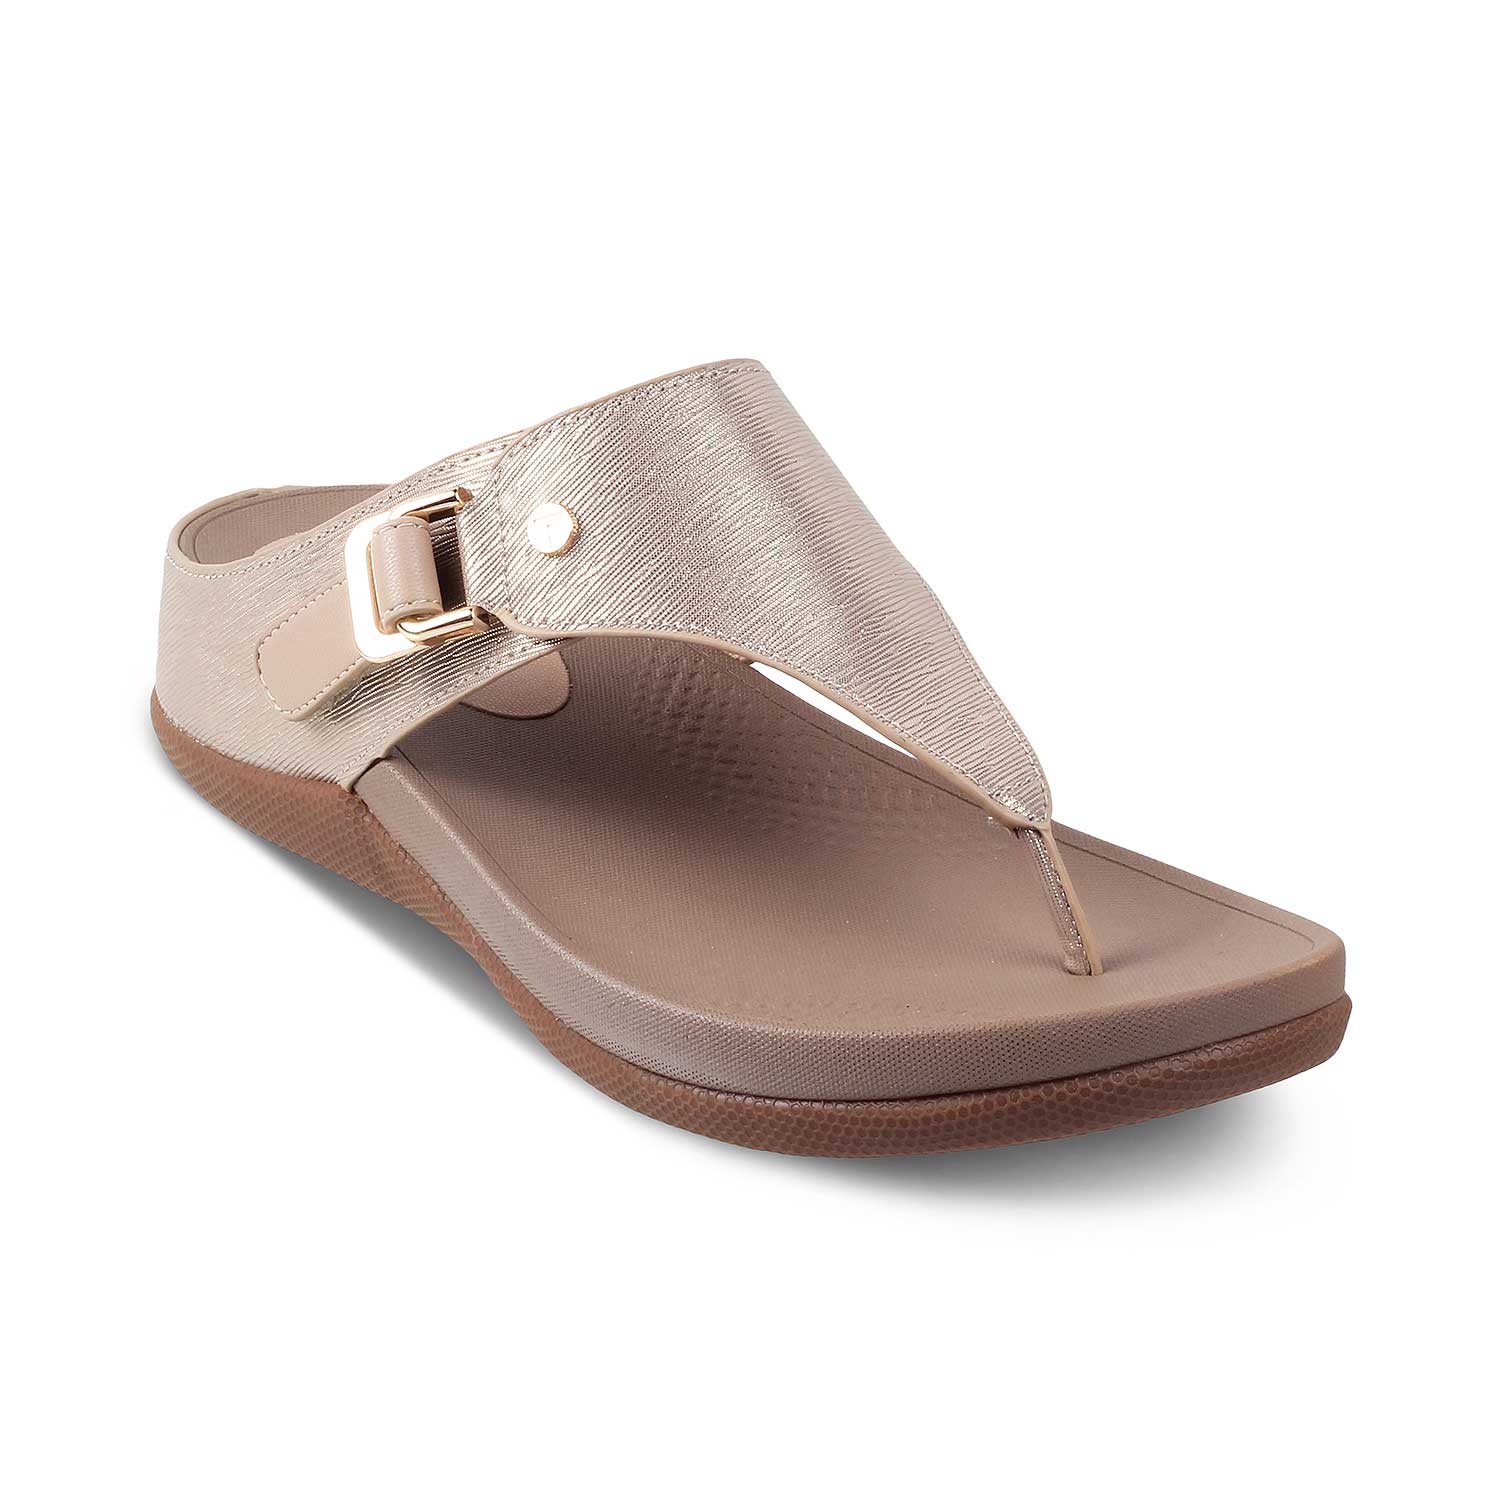 The Aaryed Gold Women's Casual Wedge Sandals Tresmode